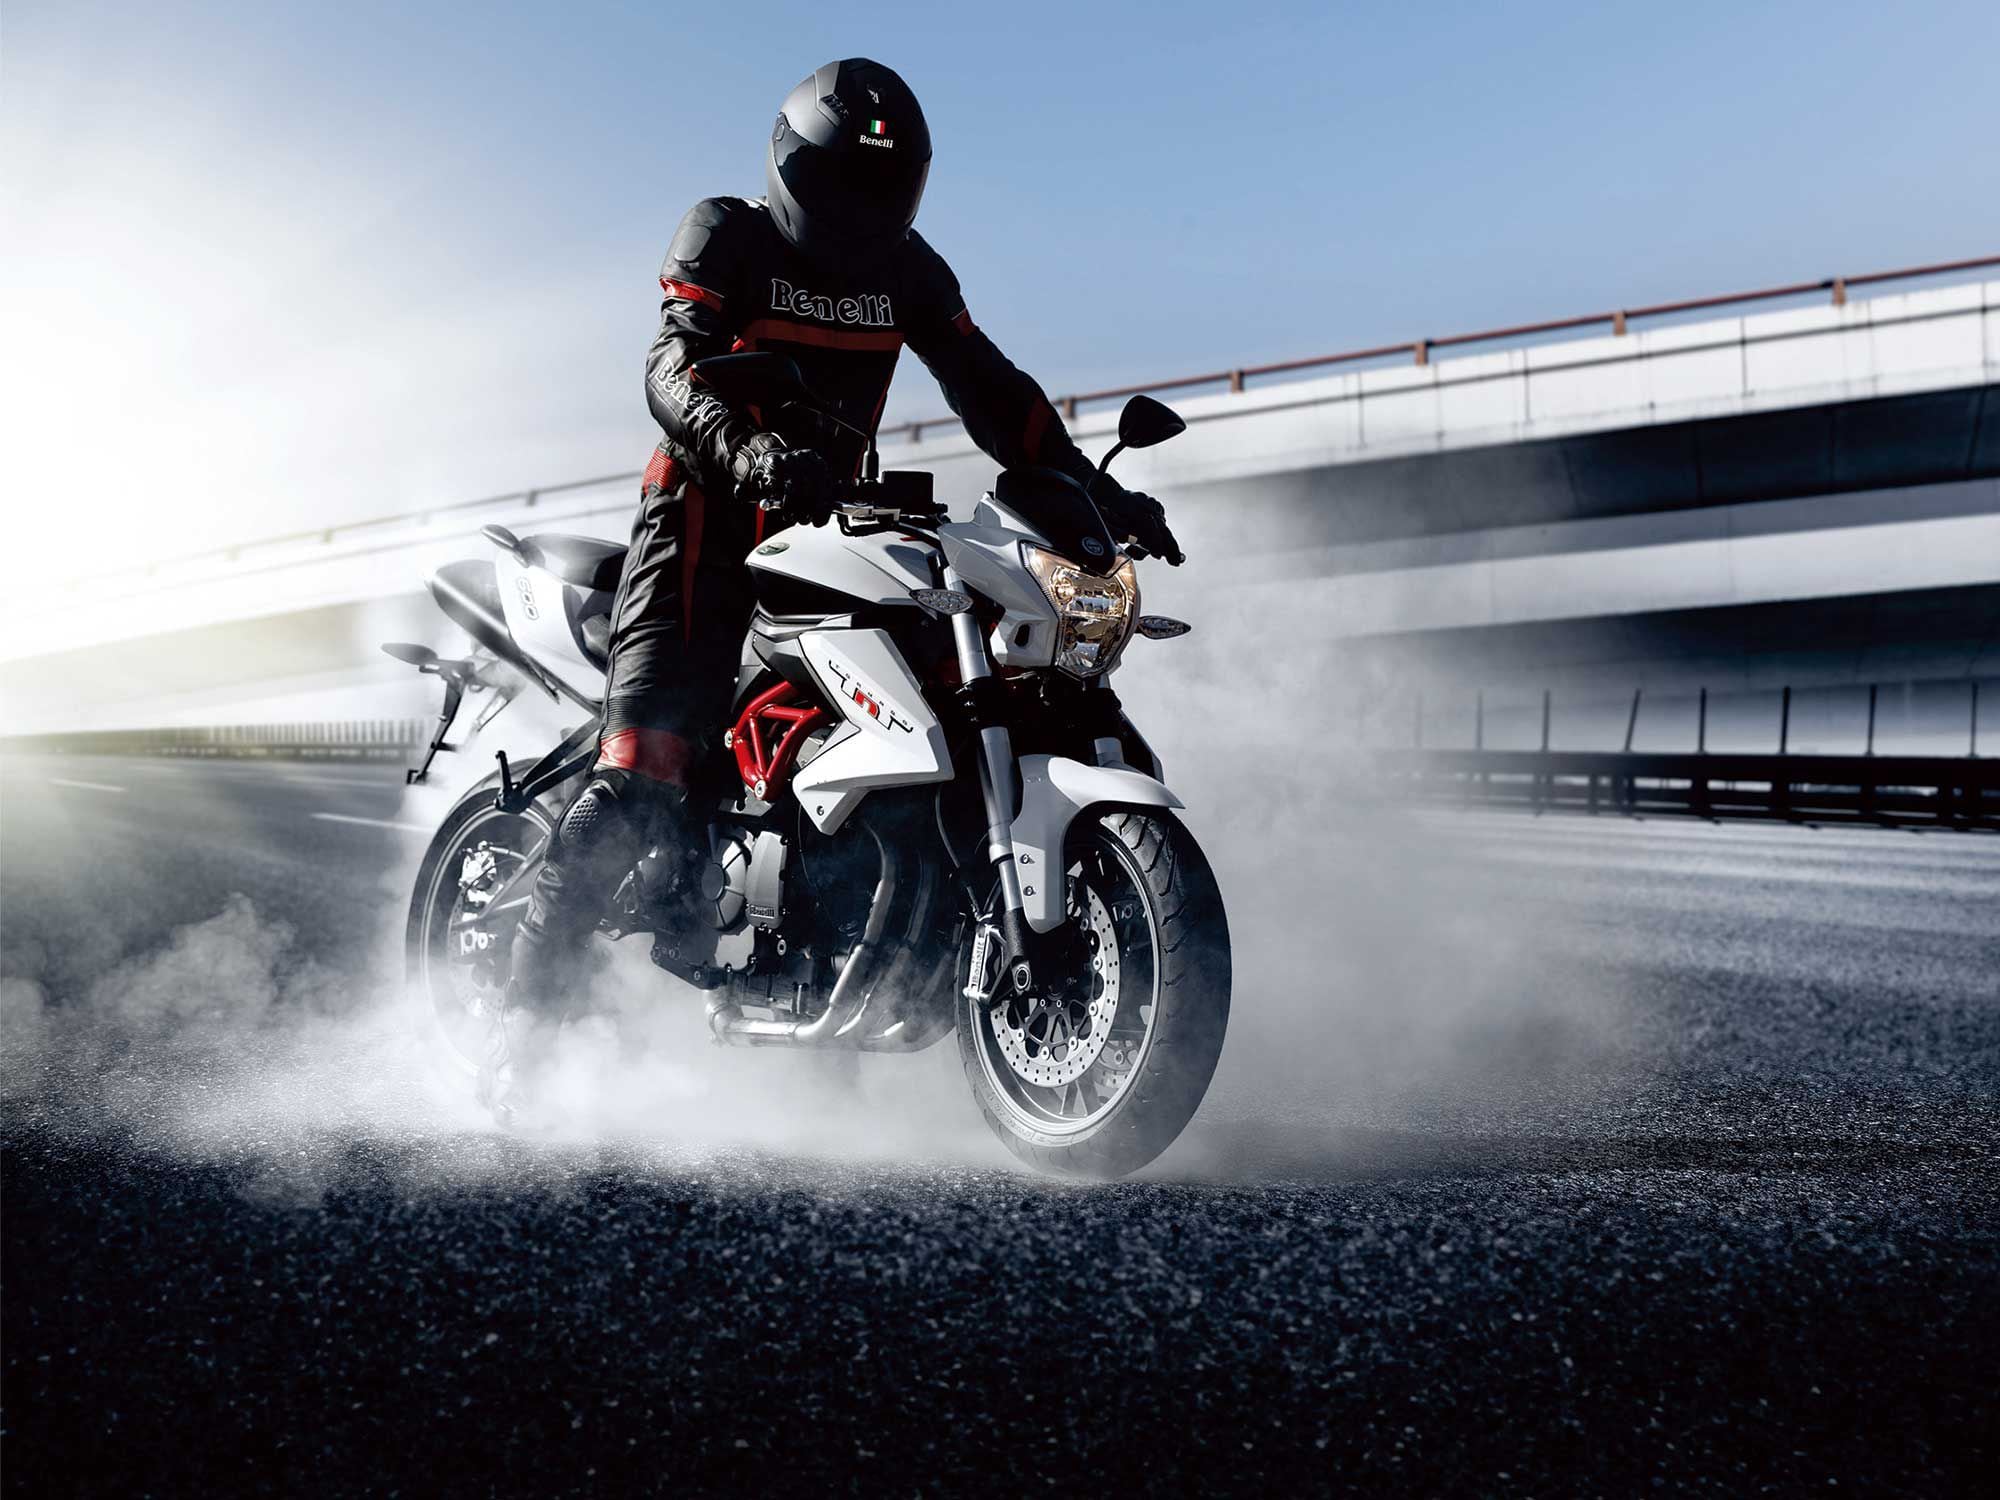 The Benelli TNT 600 putting down some liter-beater smoke.